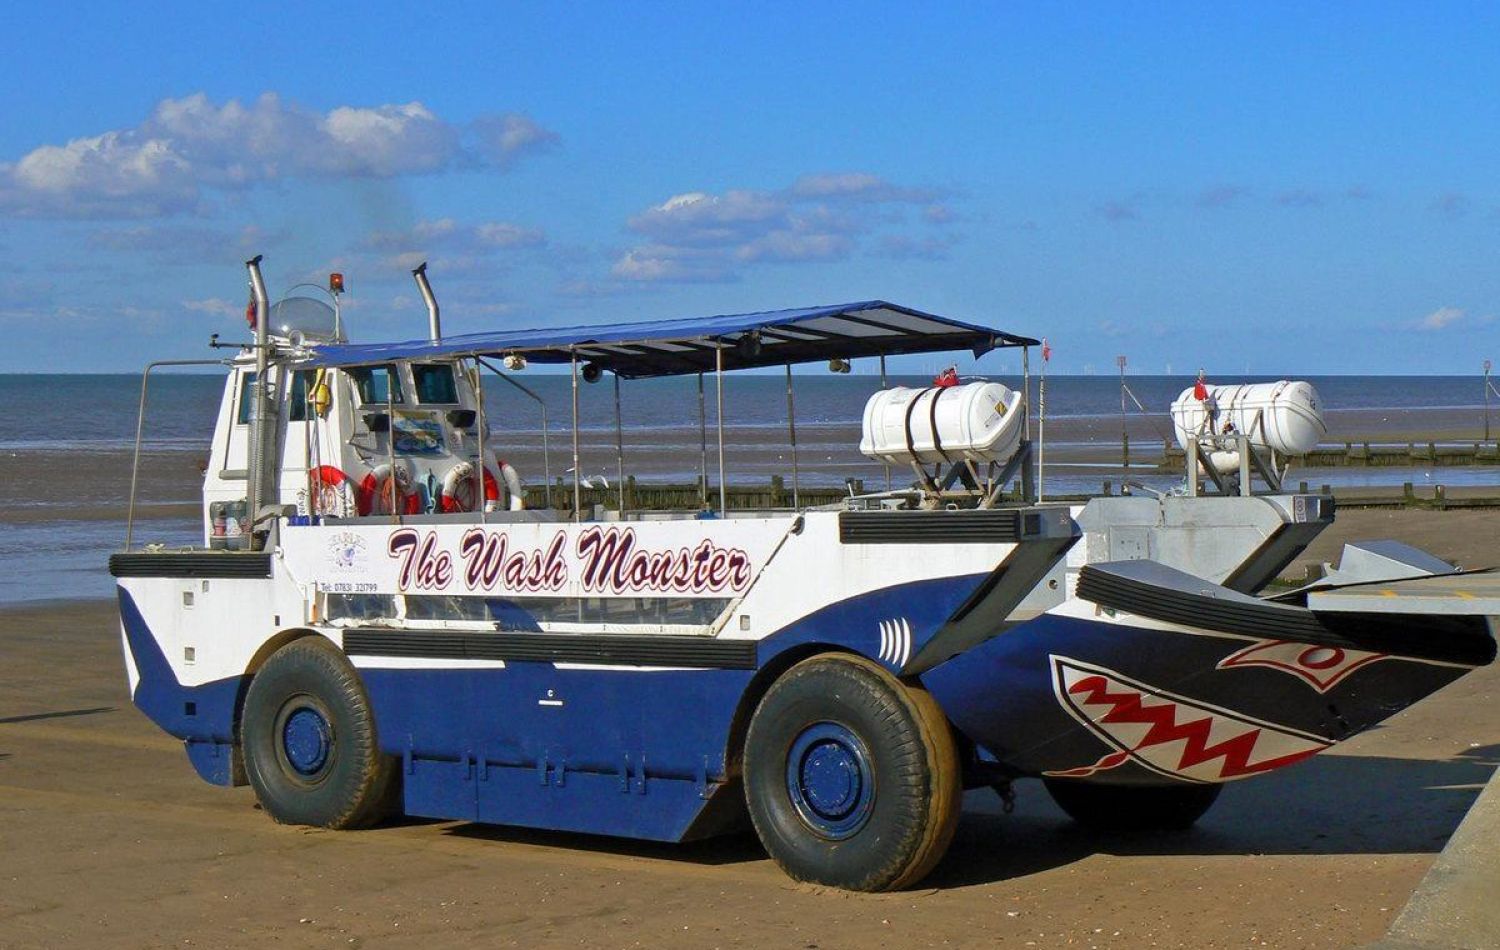 wiley the wash monster, an amphibious transport vehicle painted to have shark-like features, parked on the beach